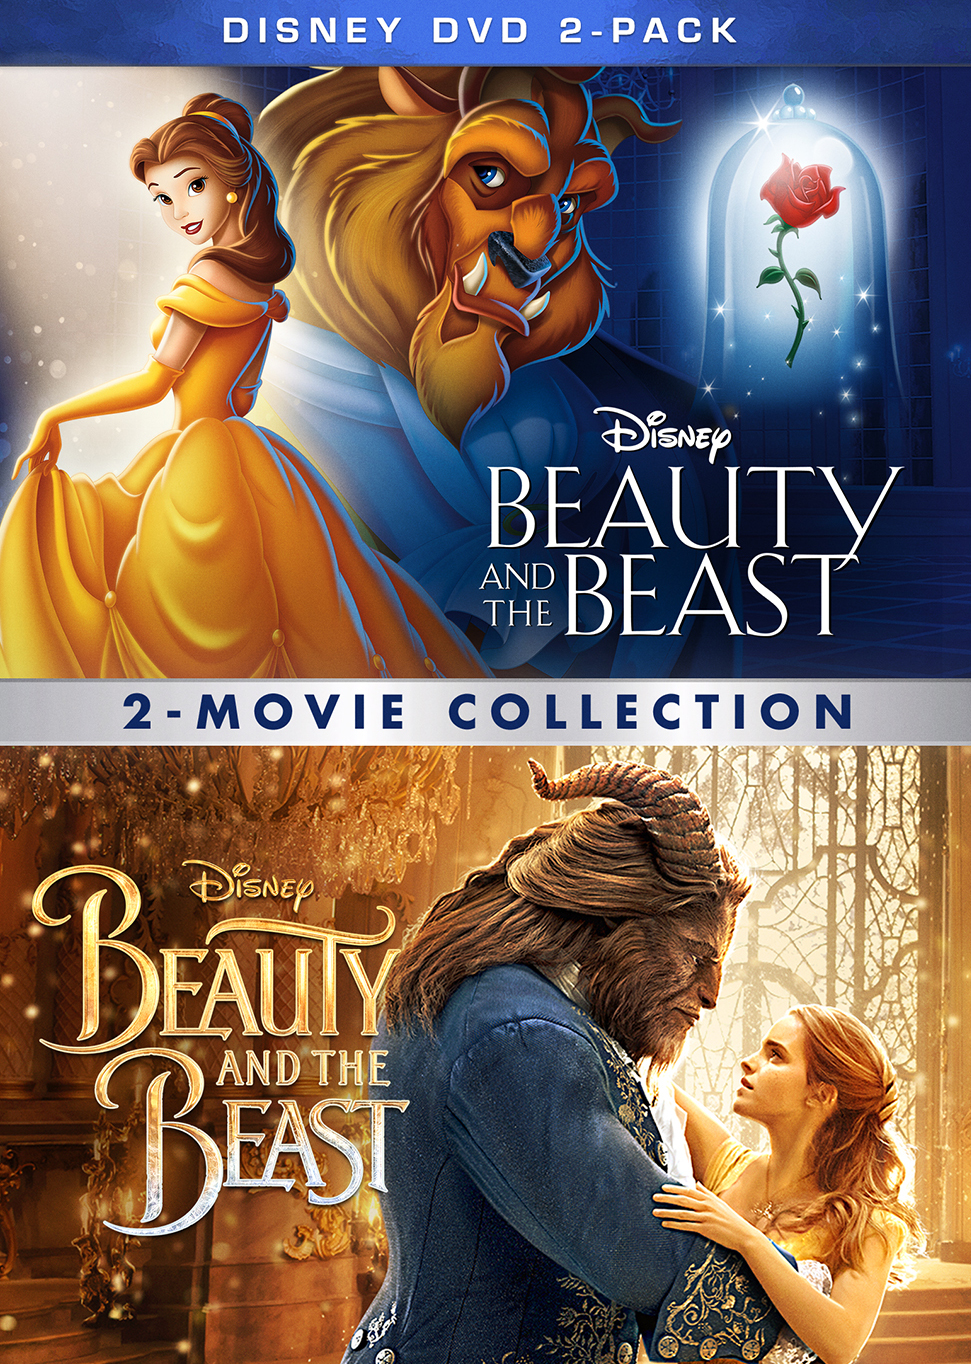 Beauty and the Beast Live Action/Signature 2-Disc Bundle [DVD] - Best Buy